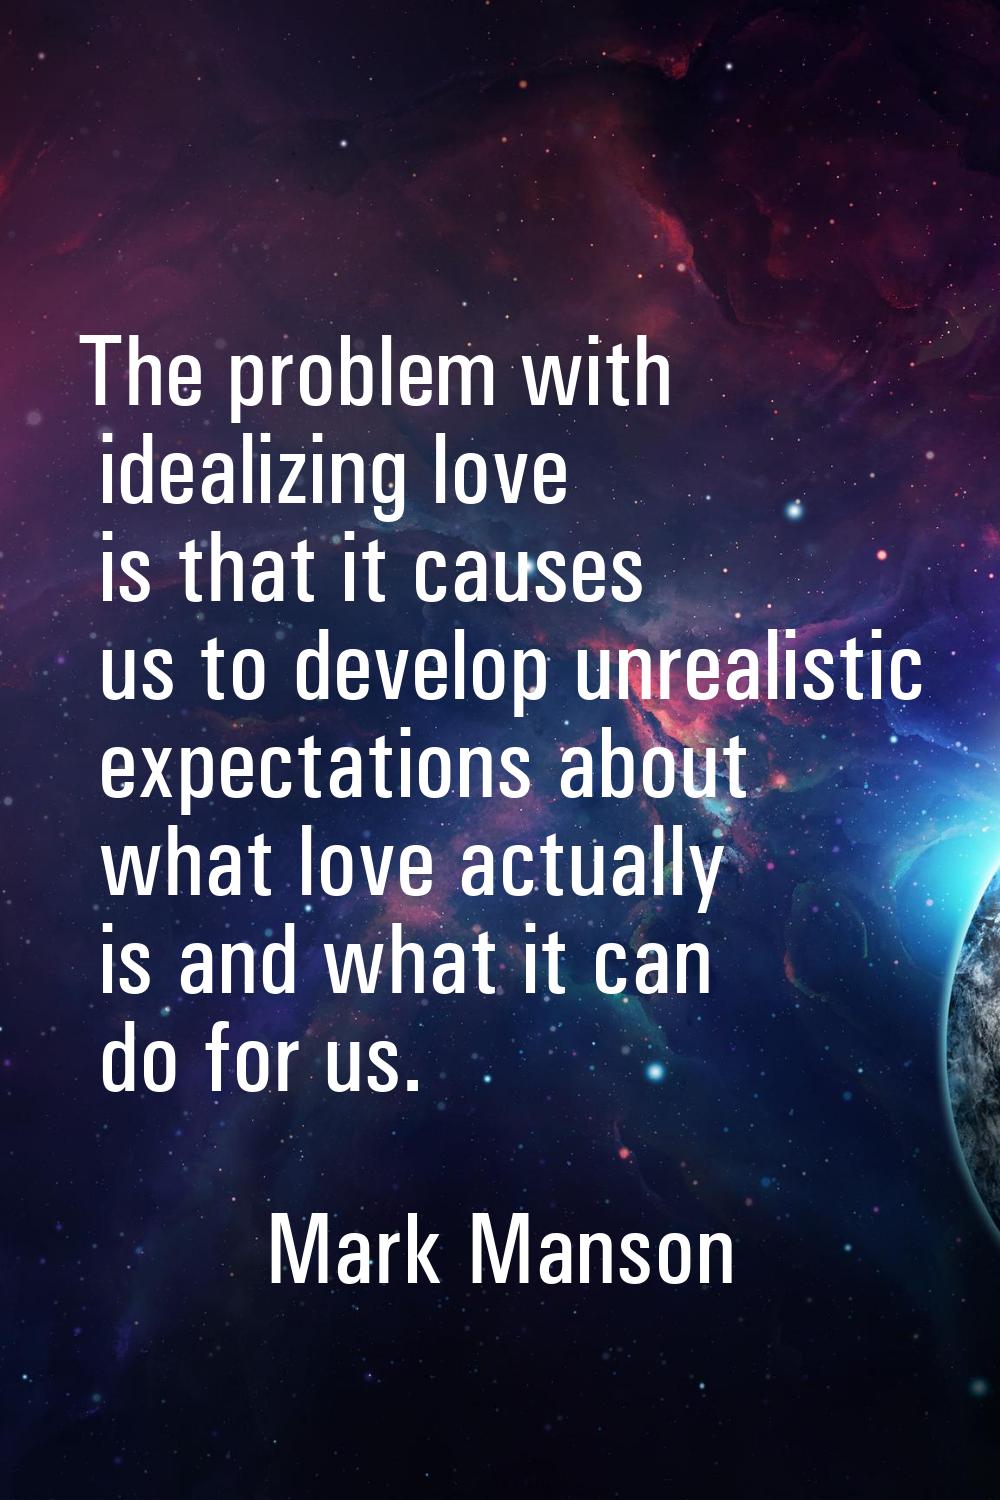 The problem with idealizing love is that it causes us to develop unrealistic expectations about wha